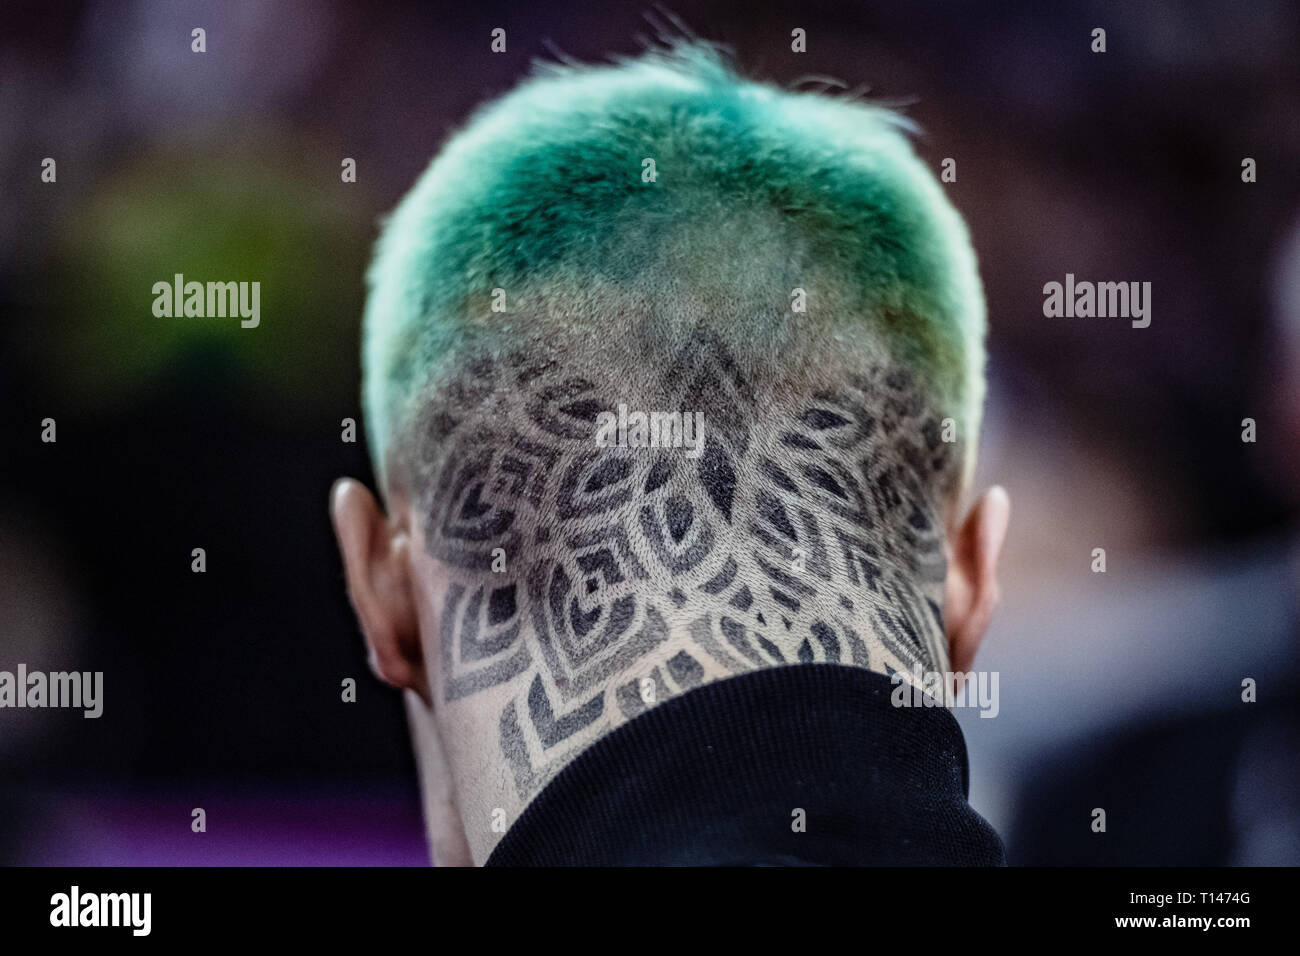 London, UK. 23rd March, 2019. Casimir Schmidt shows the tattoos on his head during the Matchroom Multisport presents the 2019 Superstars of Gymnastics at The O2 Arena on Saturday, 23 March 2019. LONDON ENGLAND. Credit: Taka G Wu/Alamy News Stock Photo